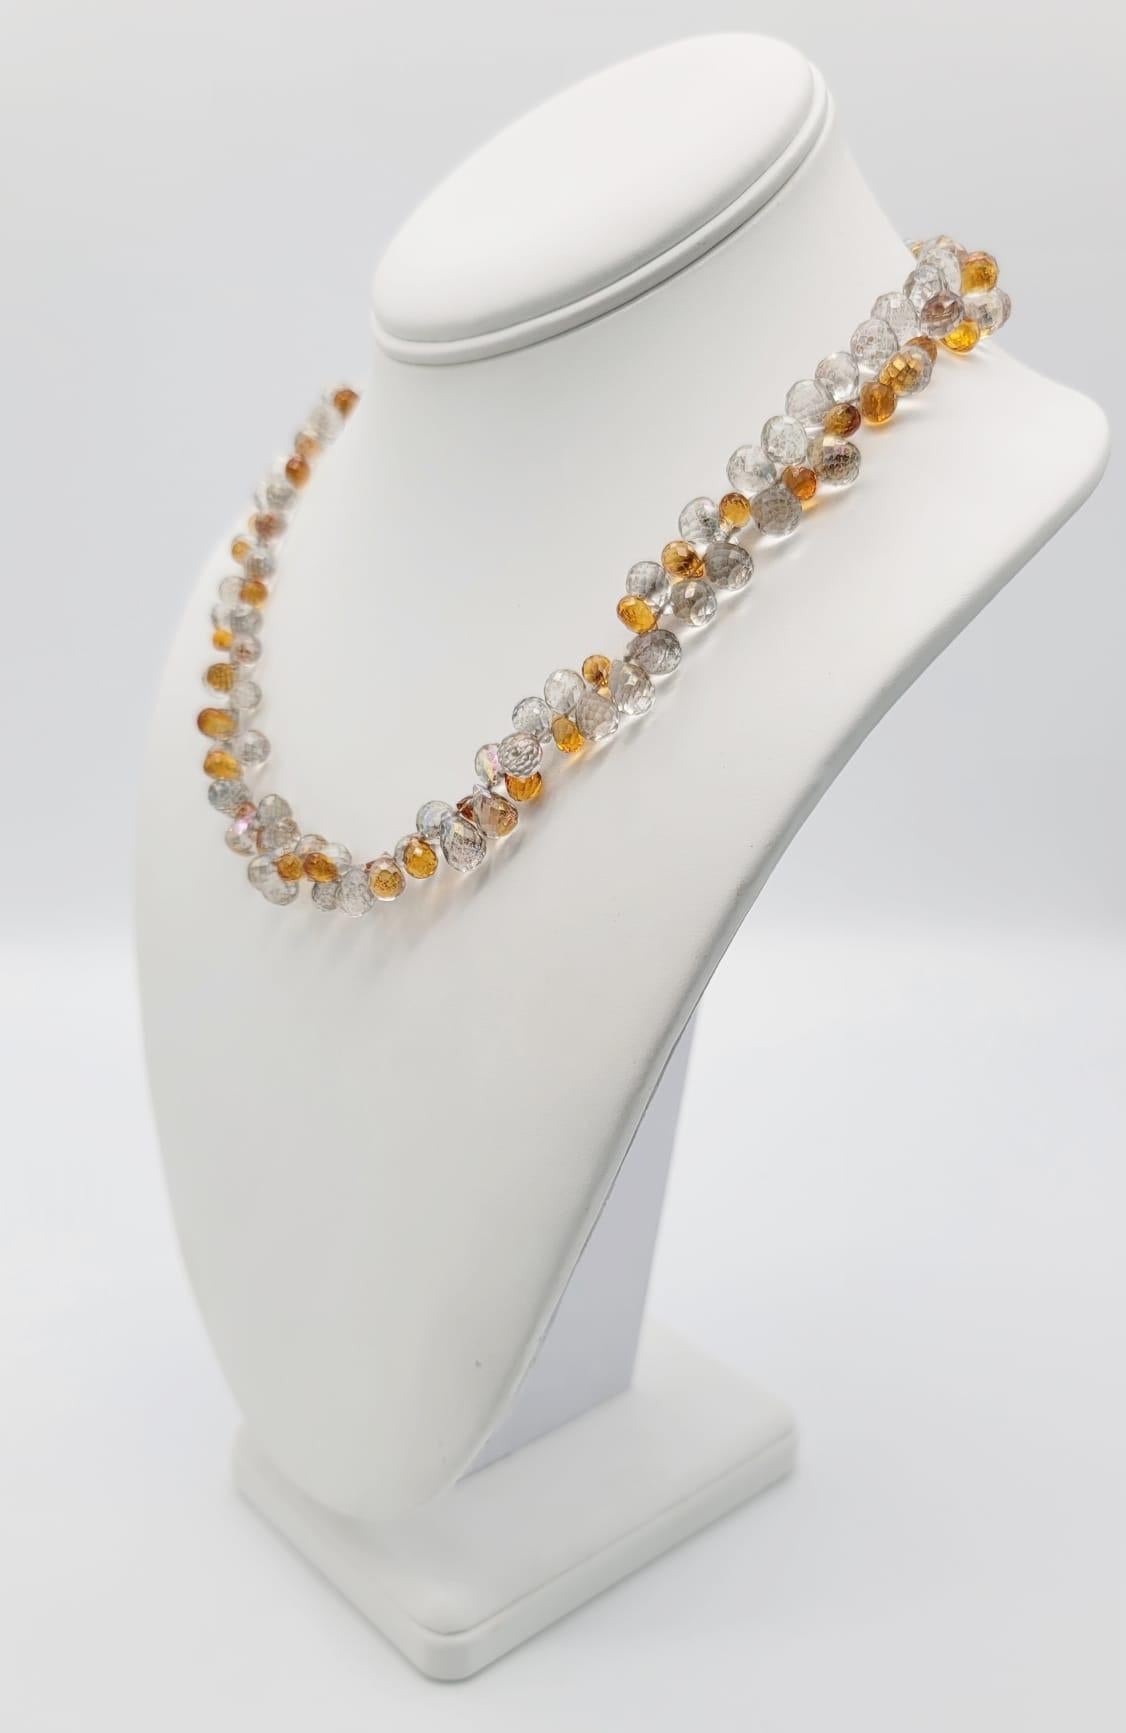 One-of-a-Kind

Topaz and crystal Quartz faceted teardrops dance together in a feminine, sparkly, face-flattering necklace,
It is like a beam of sunshine (or your personal spotlight ) at your throat. The clasp is a boxed sterling silver with a